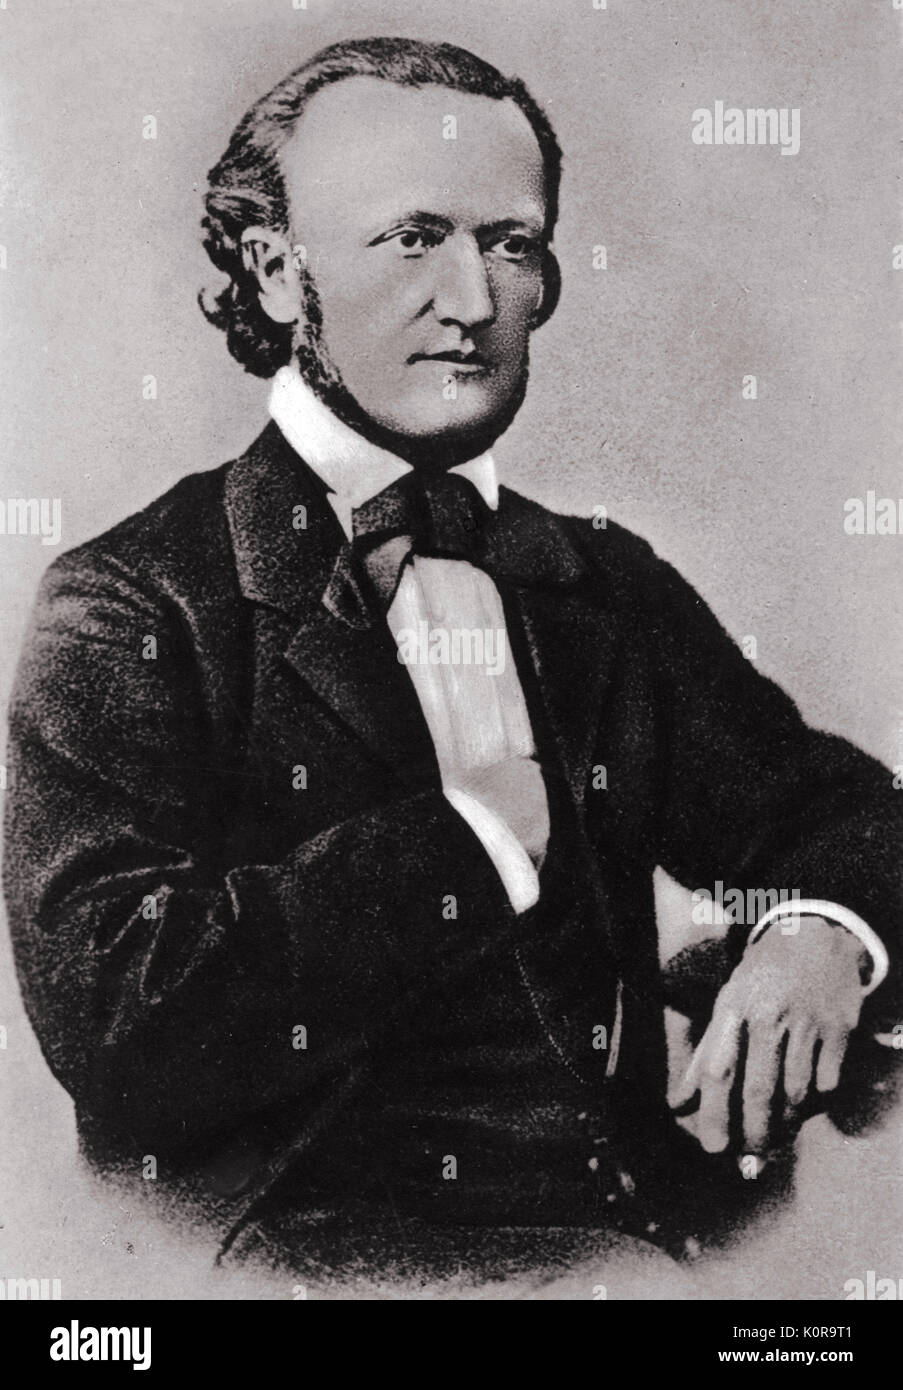 Wilhelm Richard Wagner - portrait of  German composer, conductor, music theorist and essayist, St Petersburg, 1863. 22 May 1813 - 13 February 1883. Stock Photo